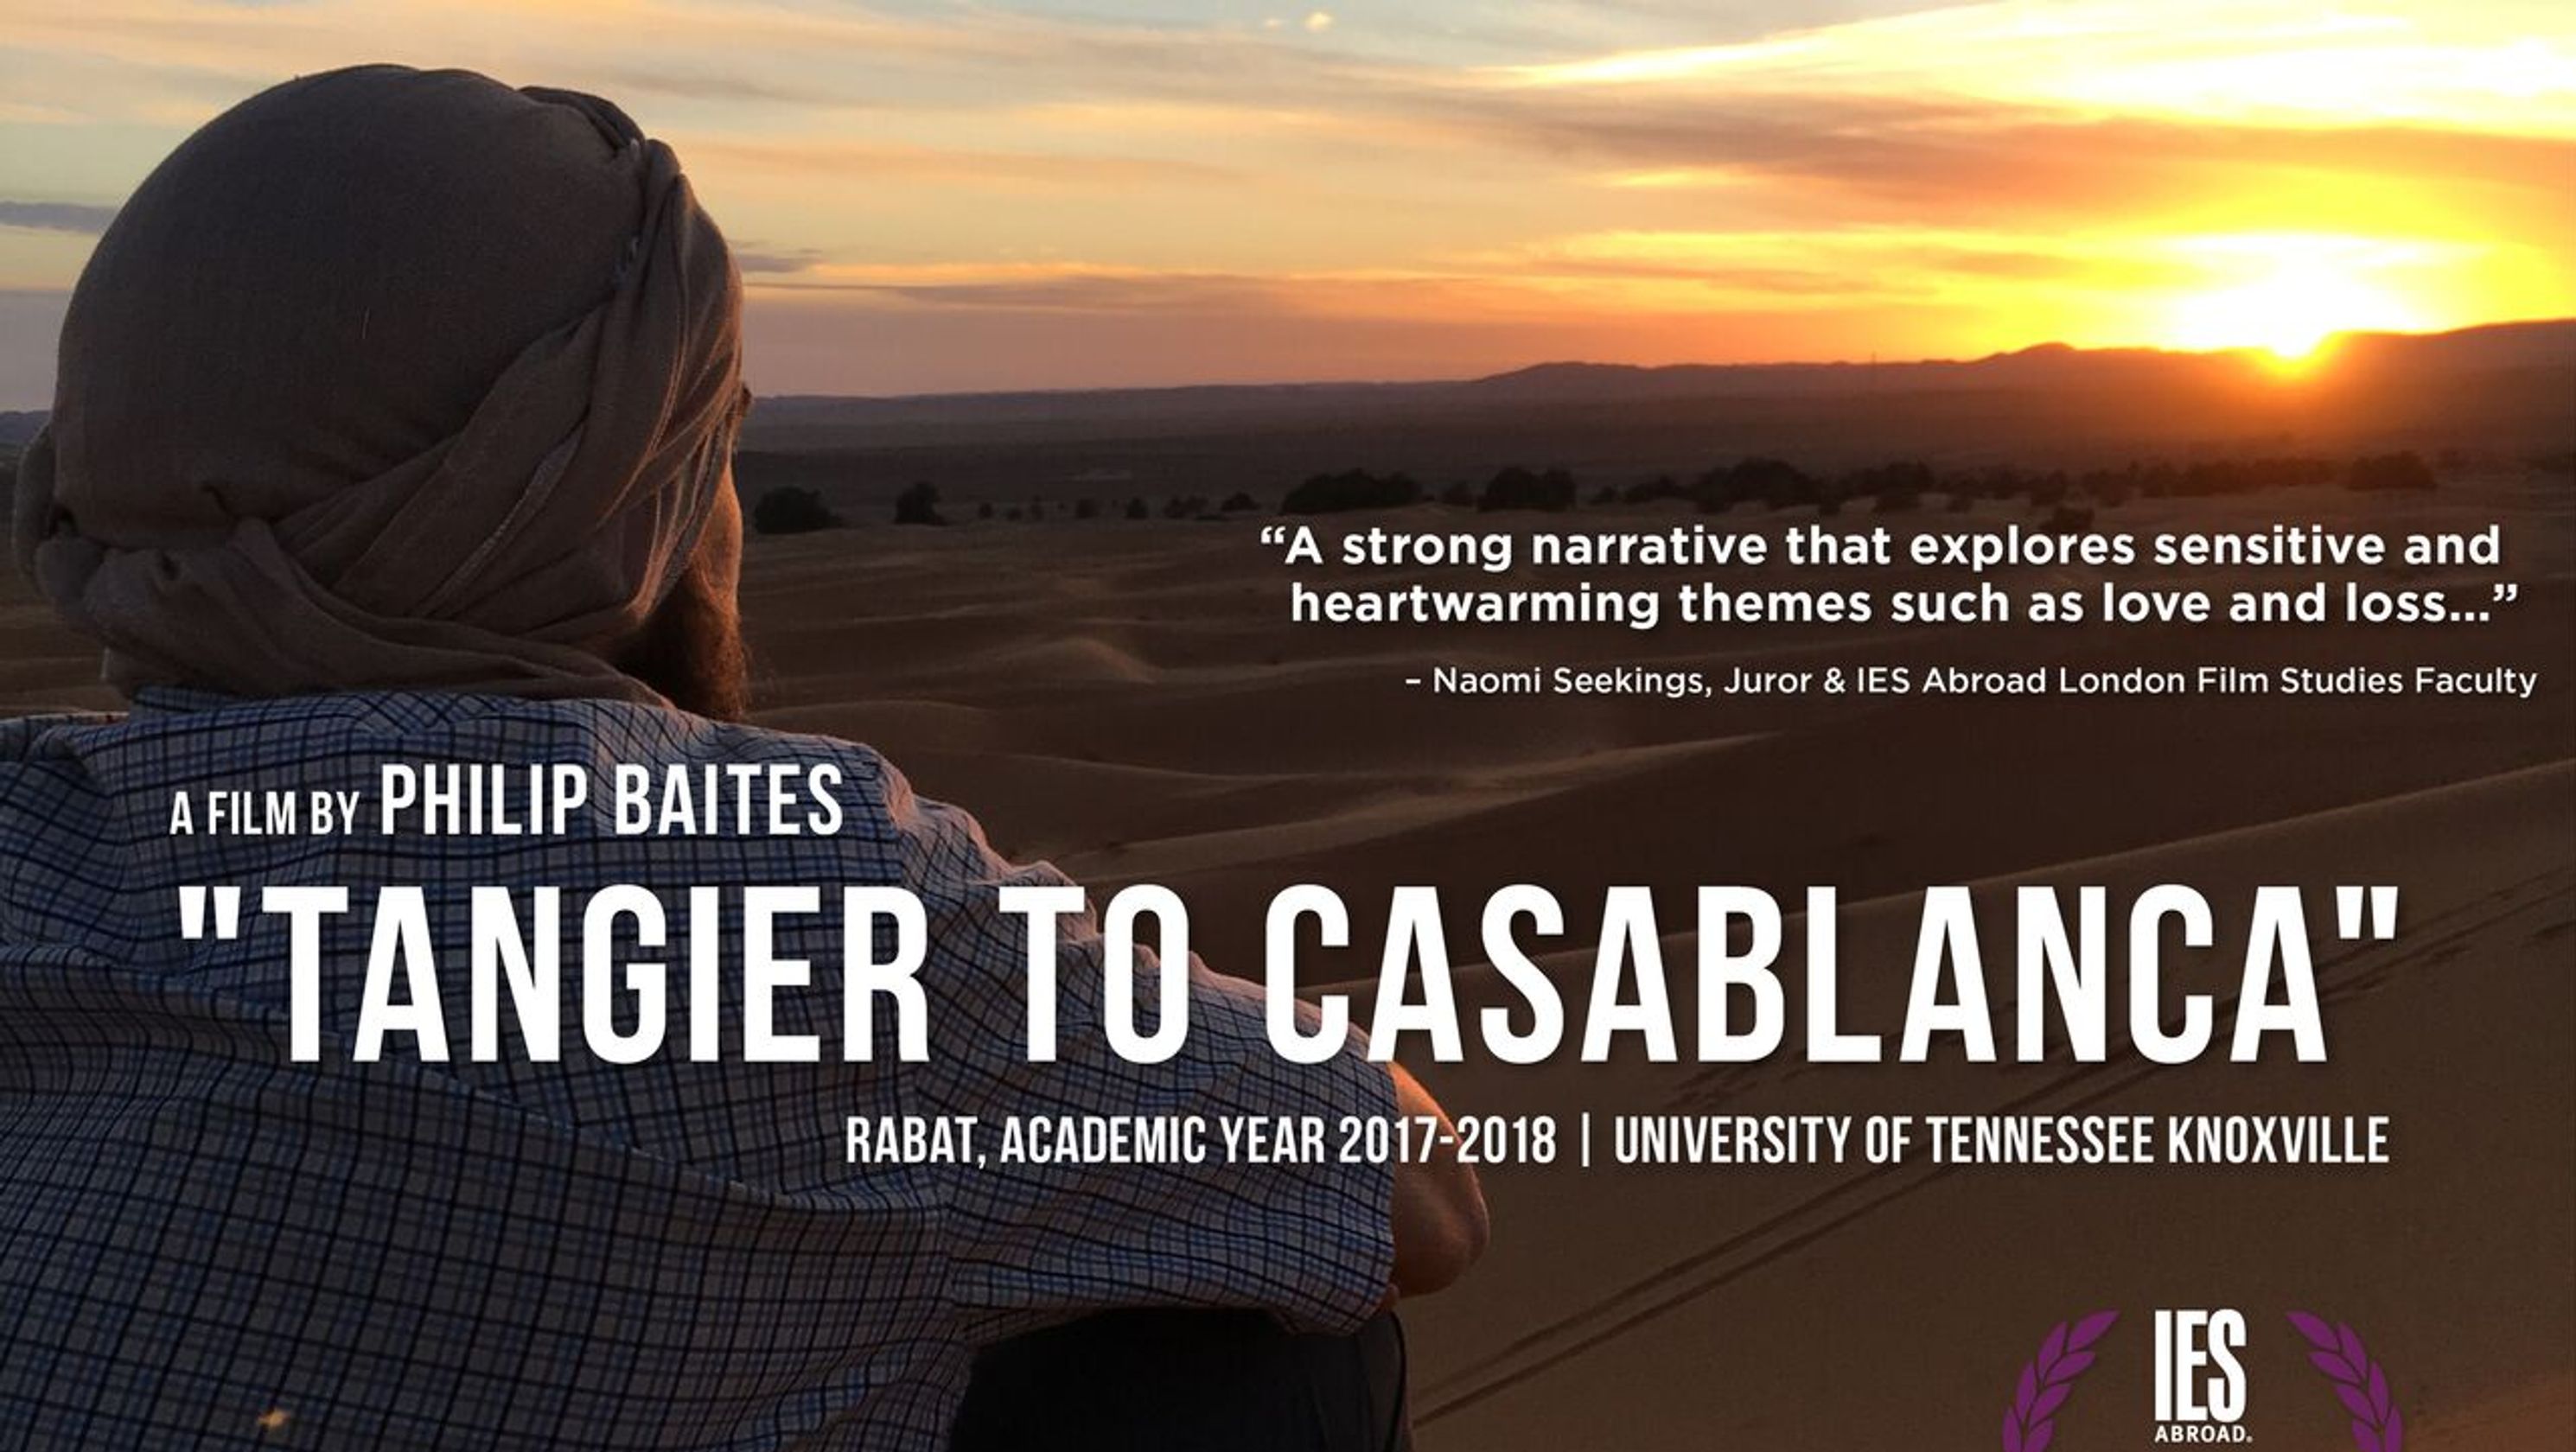 Student Philip Baites looking out at a sunset in Morocco. Text on image says "A film by Philip Baites, 'Tangier to Casablanca,' Rabat, Academic Year 2017-2018, University of Tennessee Knoxville."